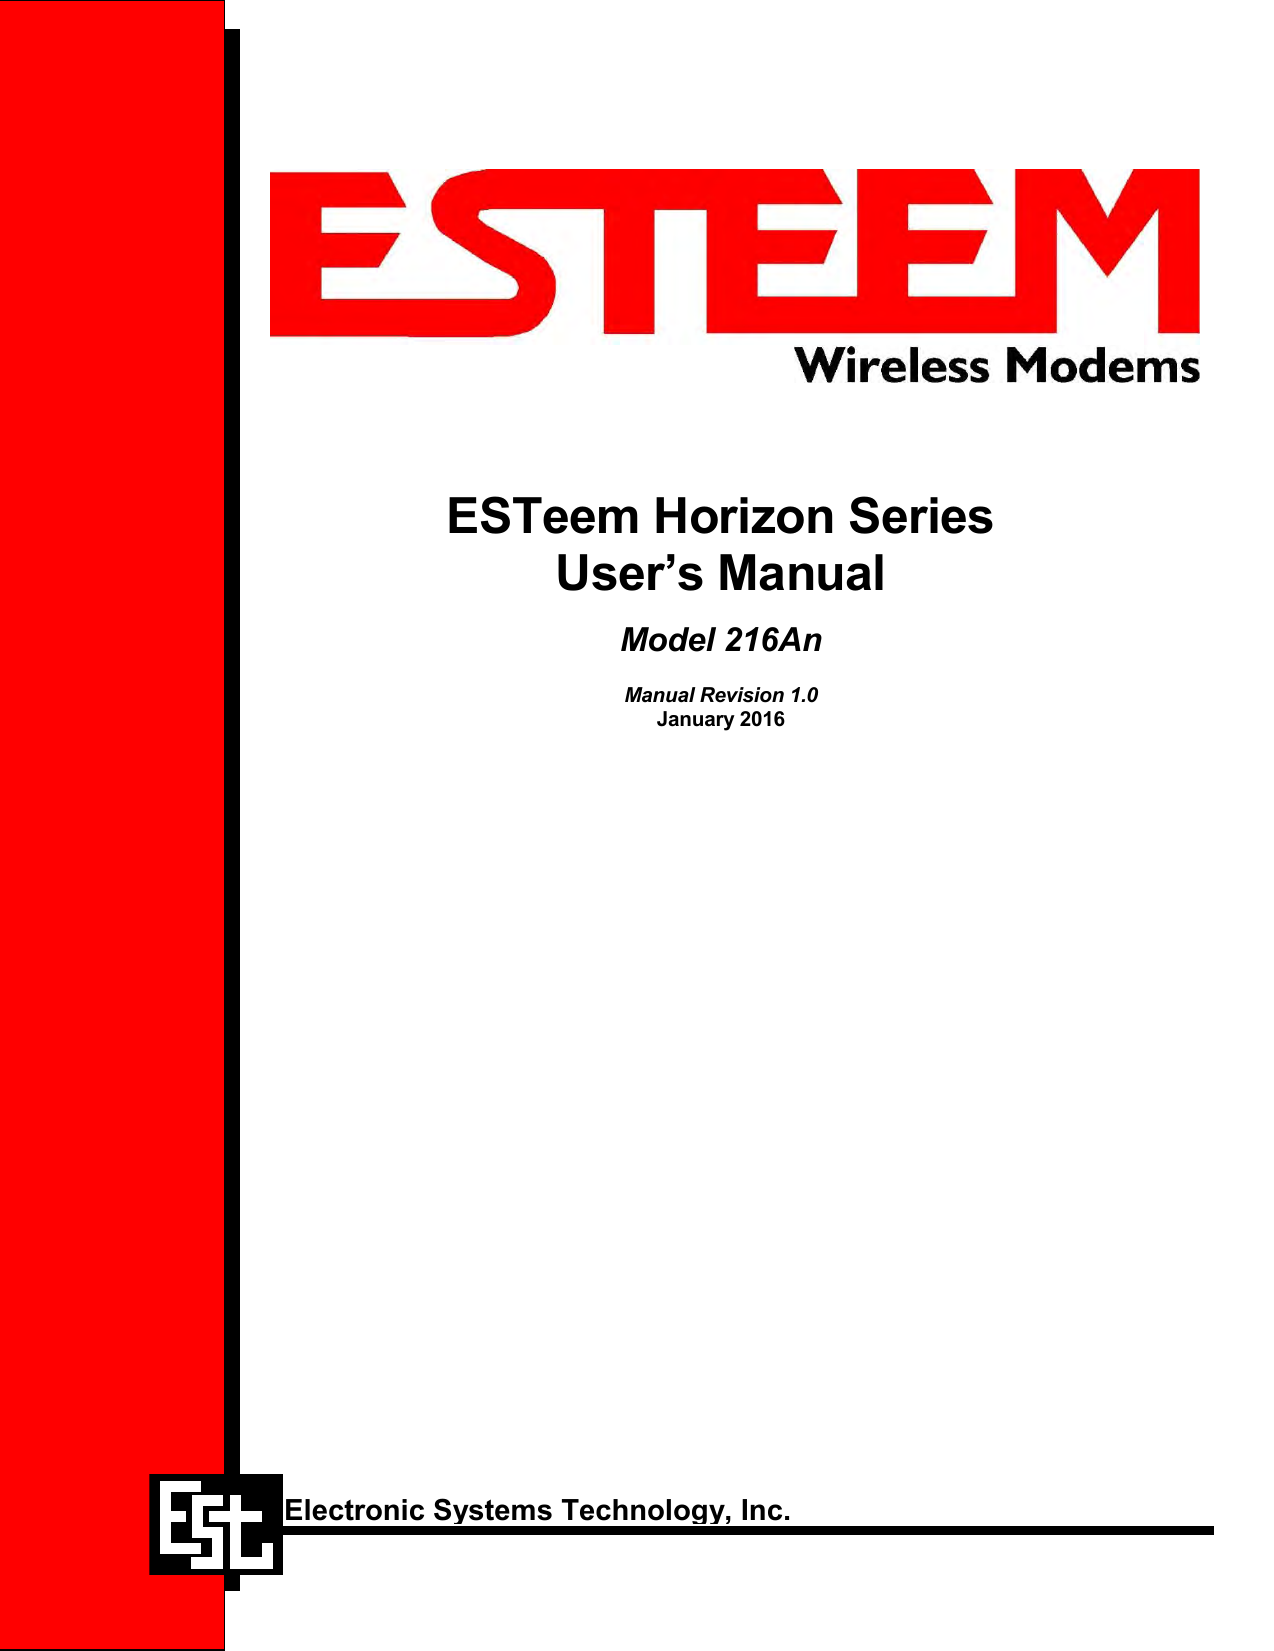                  ESTeem Horizon Series User’s Manual  Model 216An   Manual Revision 1.0 January 2016      Electronic Systems Technology, Inc. 